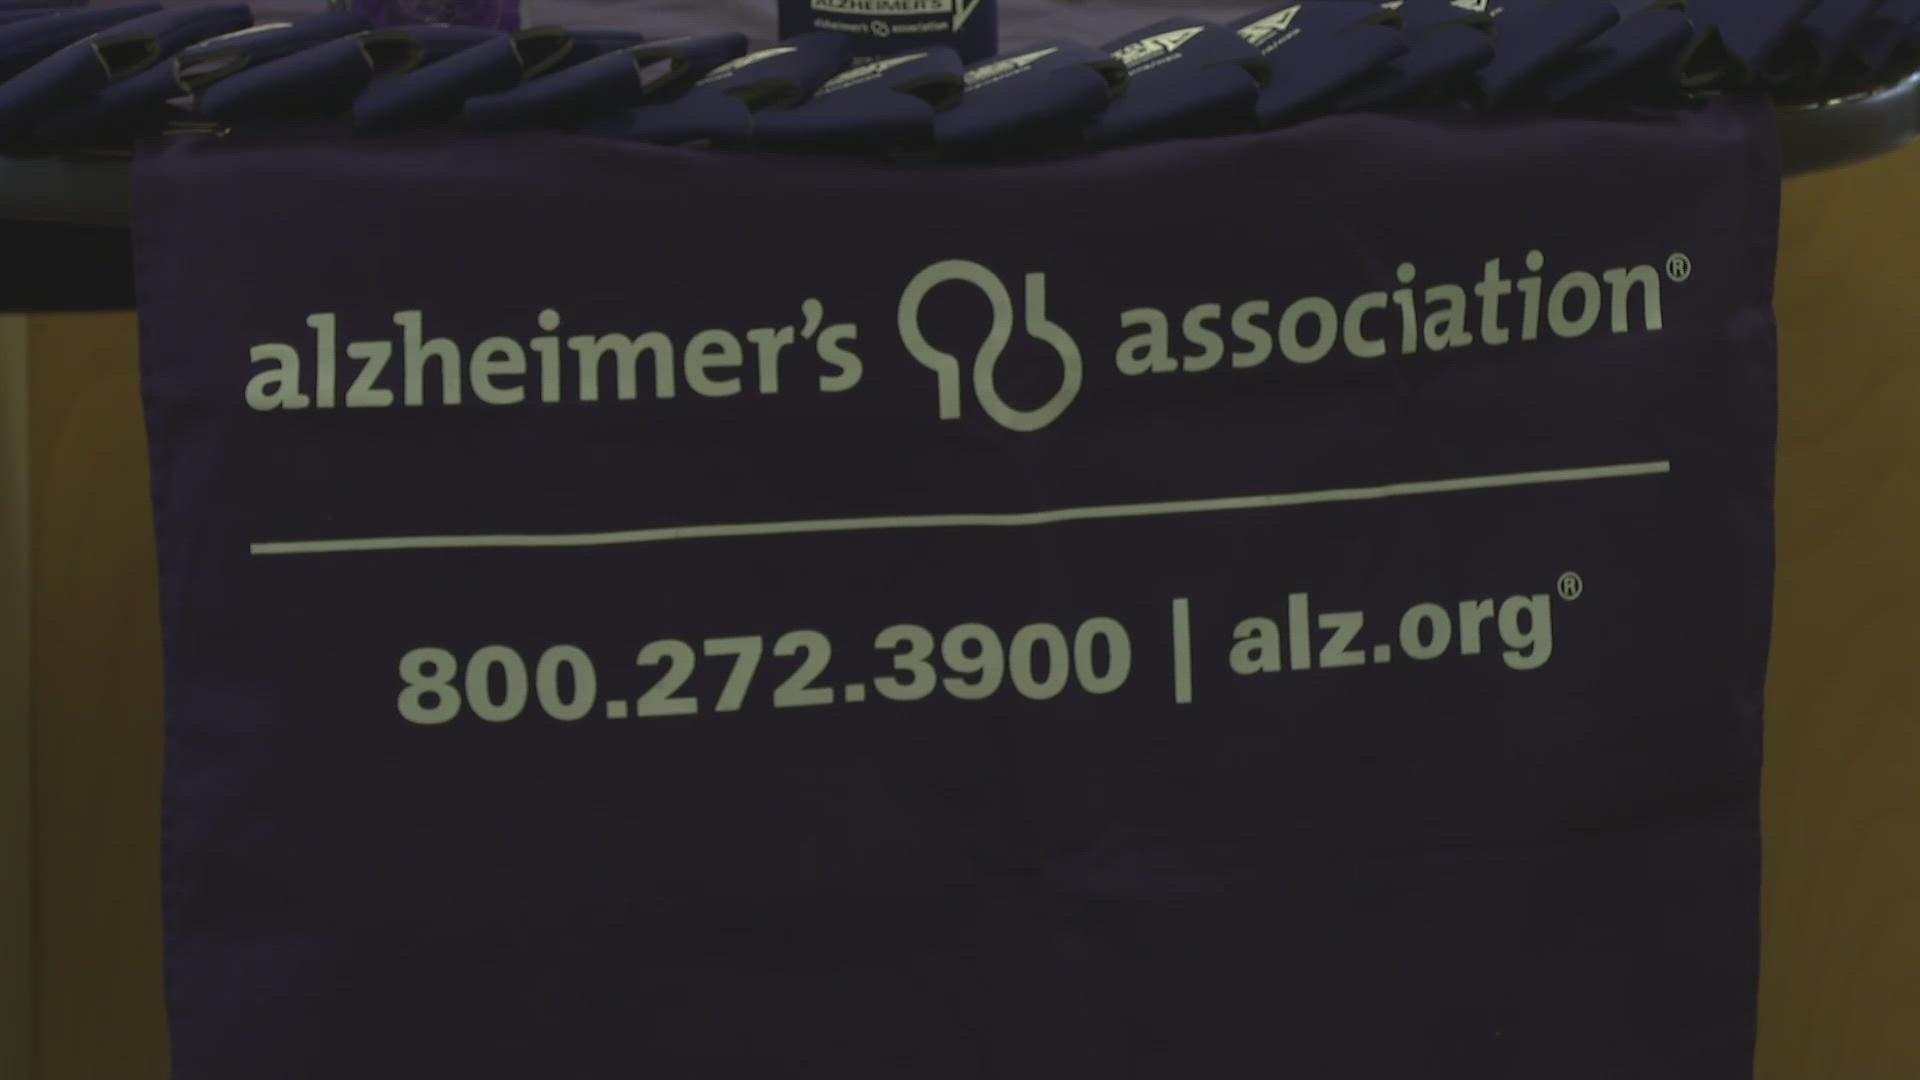 There are twice as many Black Americans who are diagnosed with Alzheimer's as white Americans, and the Alzheimer's Association is hoping to provide resources to all.